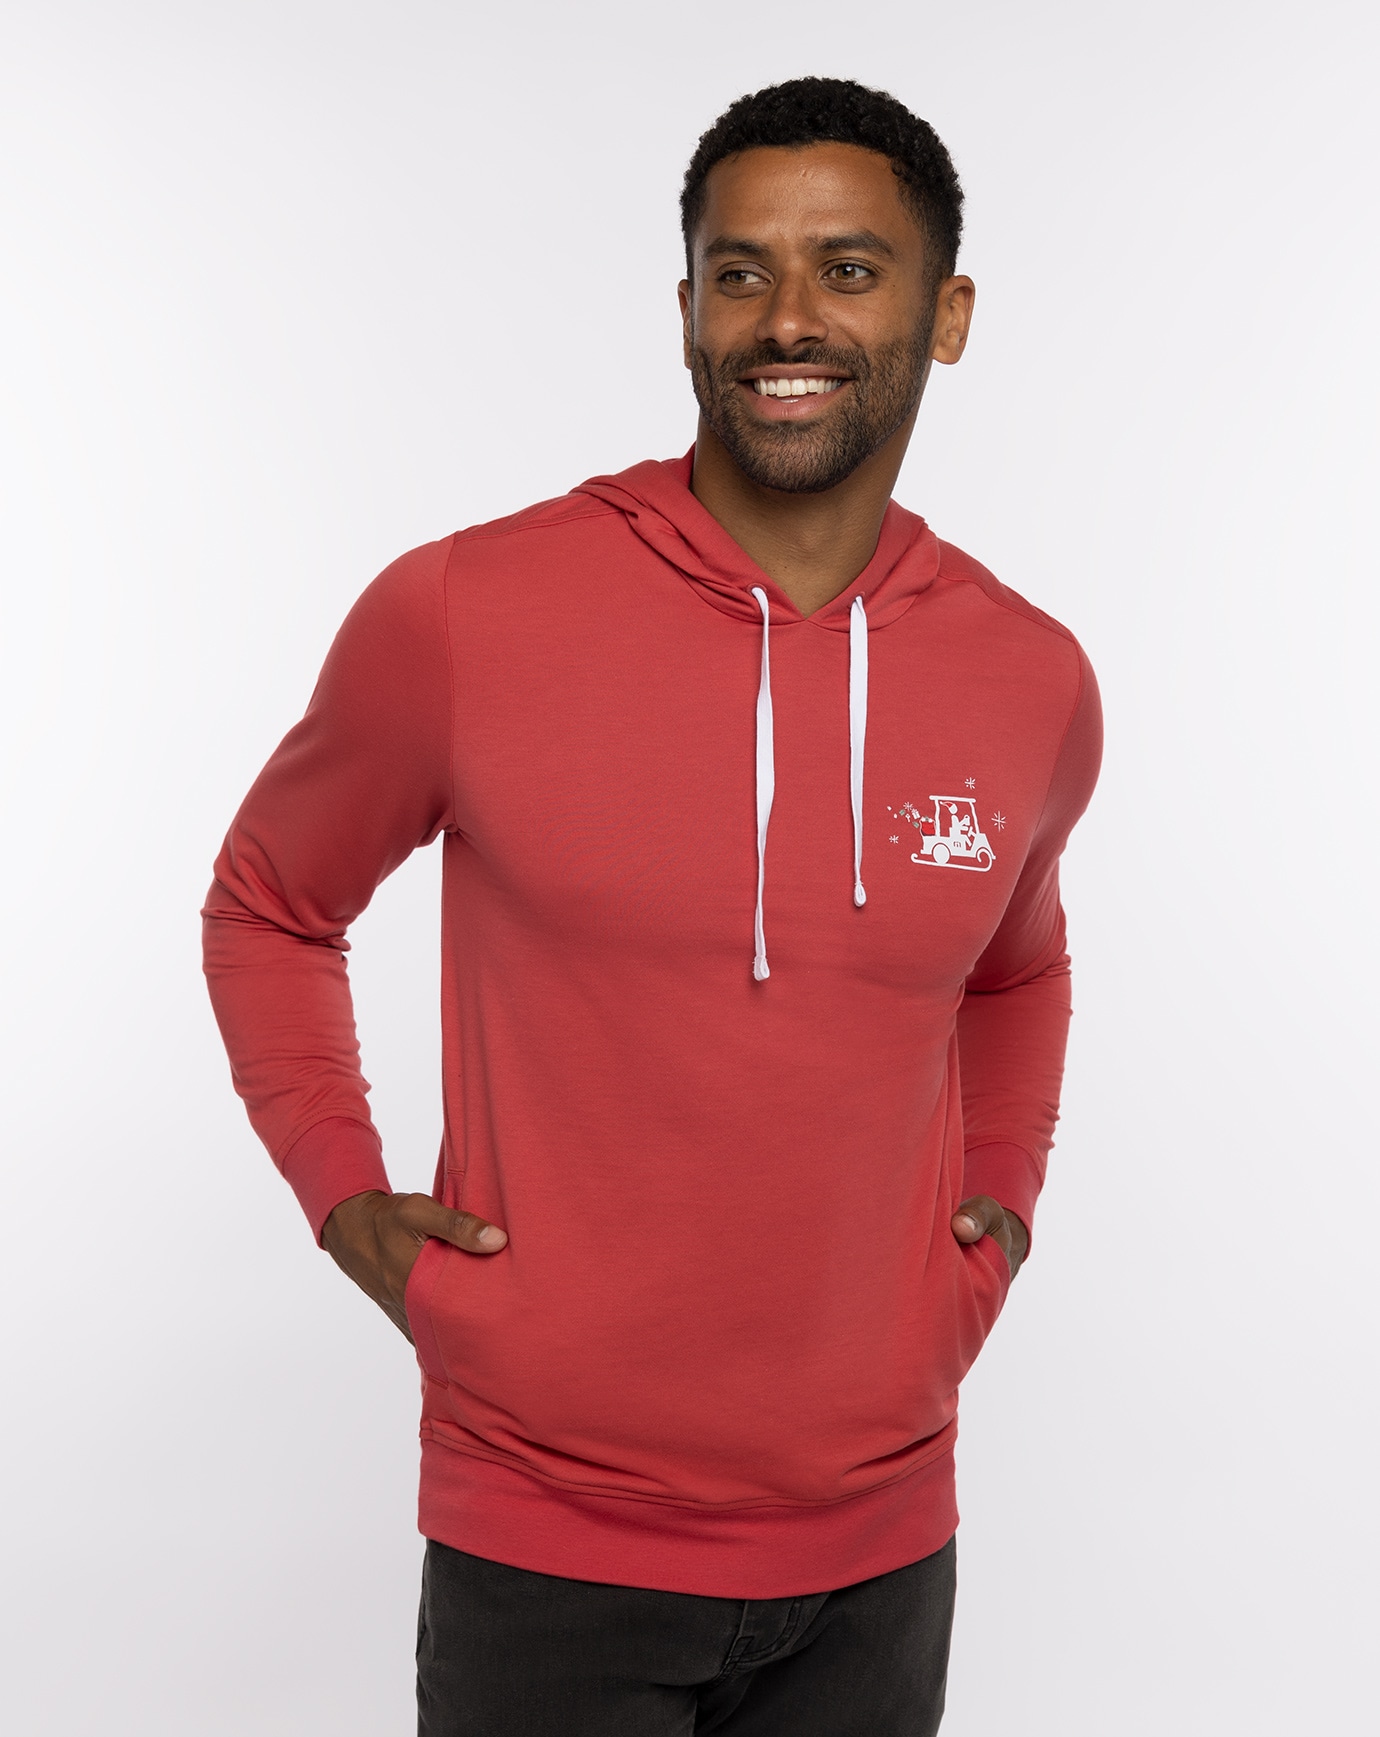 Related Product - CHESTNUTS ROASTING HOODIE